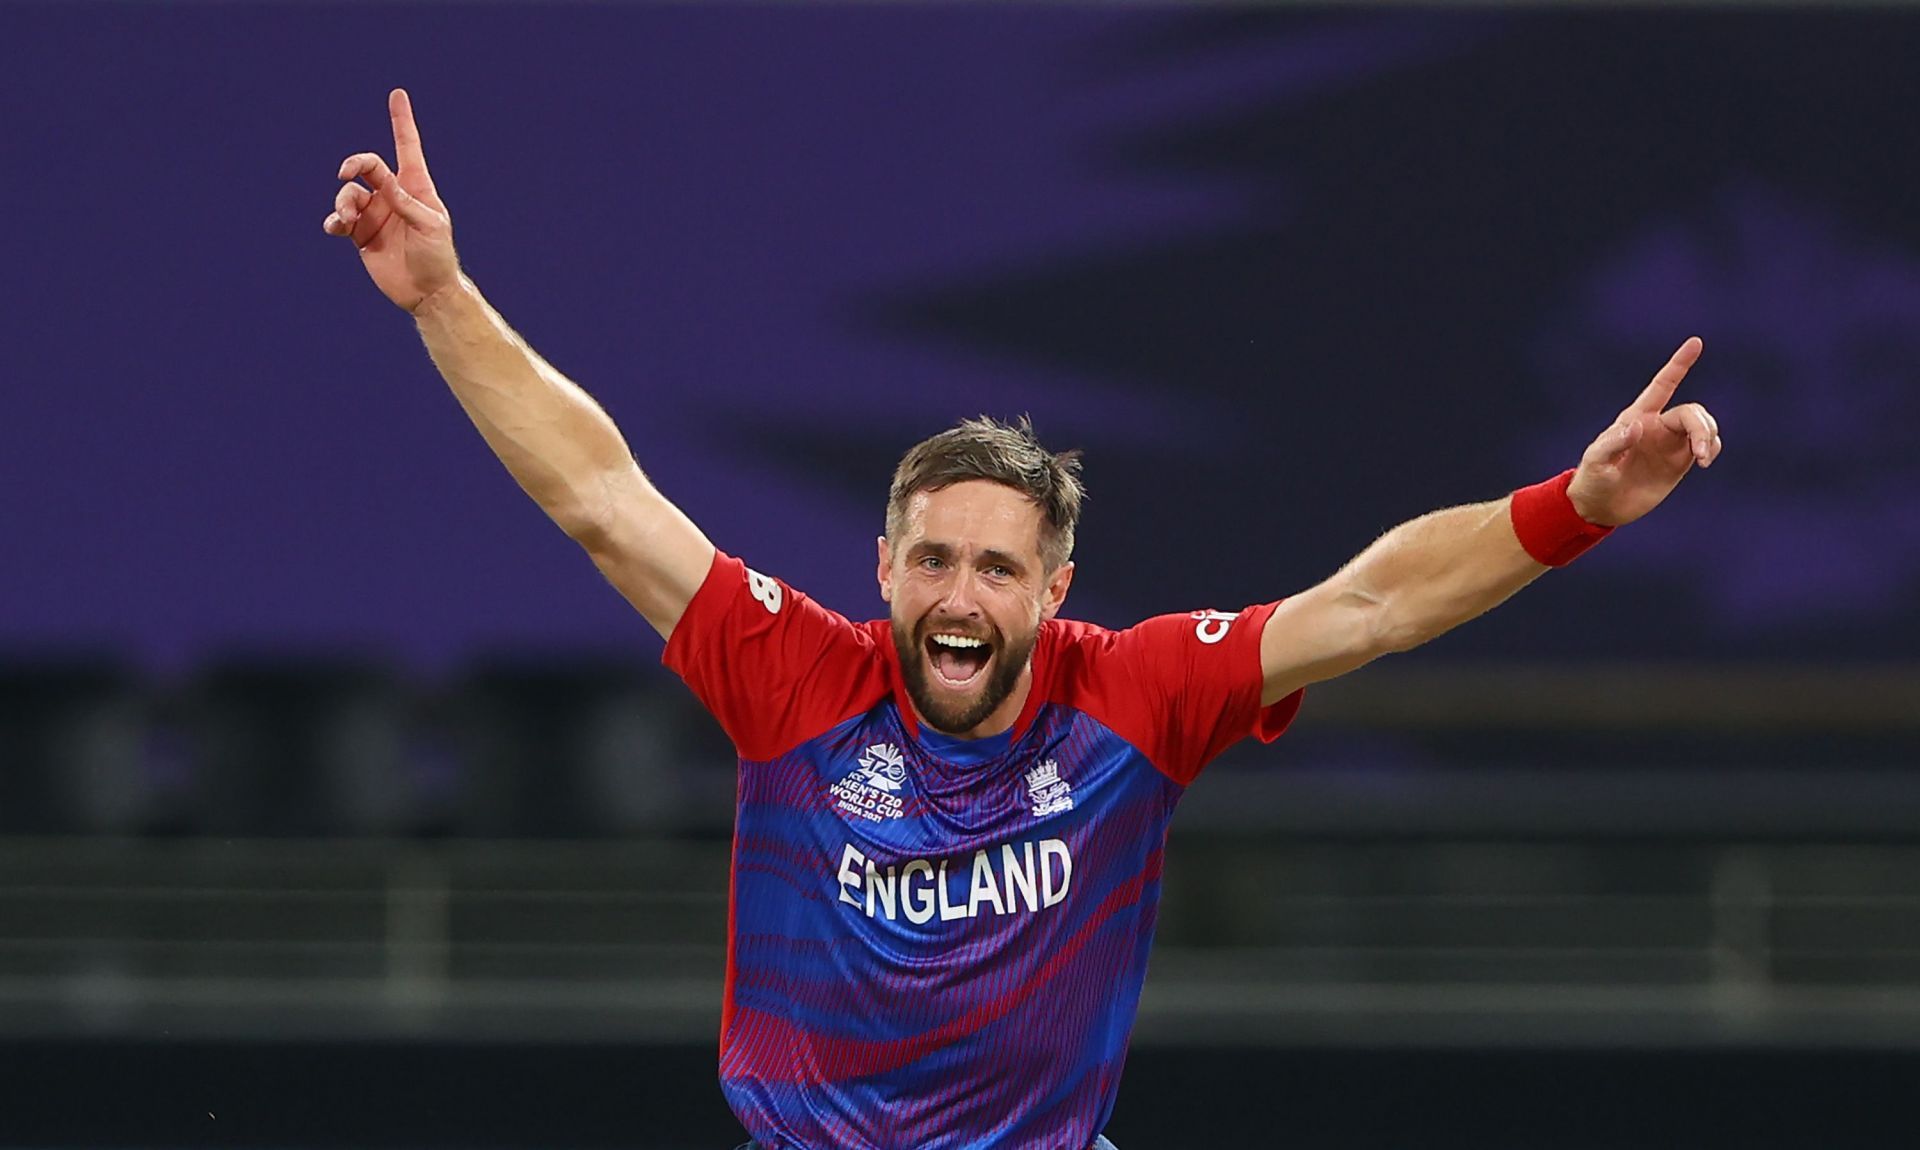 Chris Woakes has picked up 160 wickets in 112 ODIs.